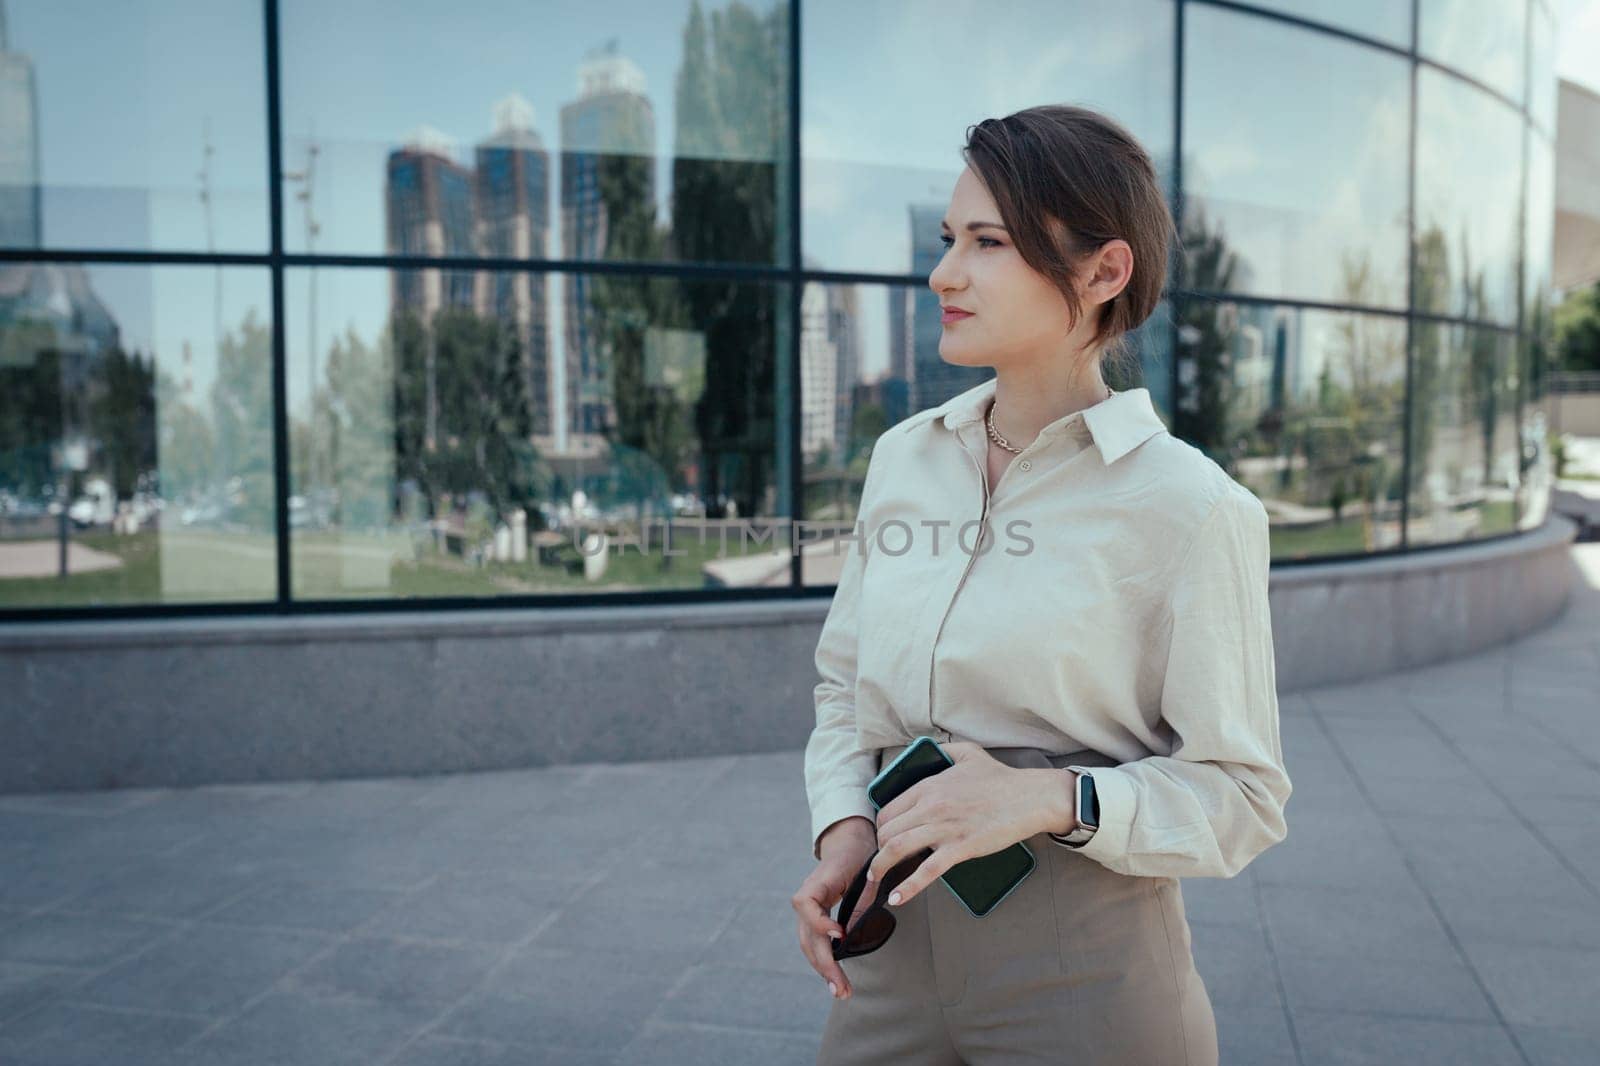 Caucasian young woman in a business suit on the background of an office modern building.